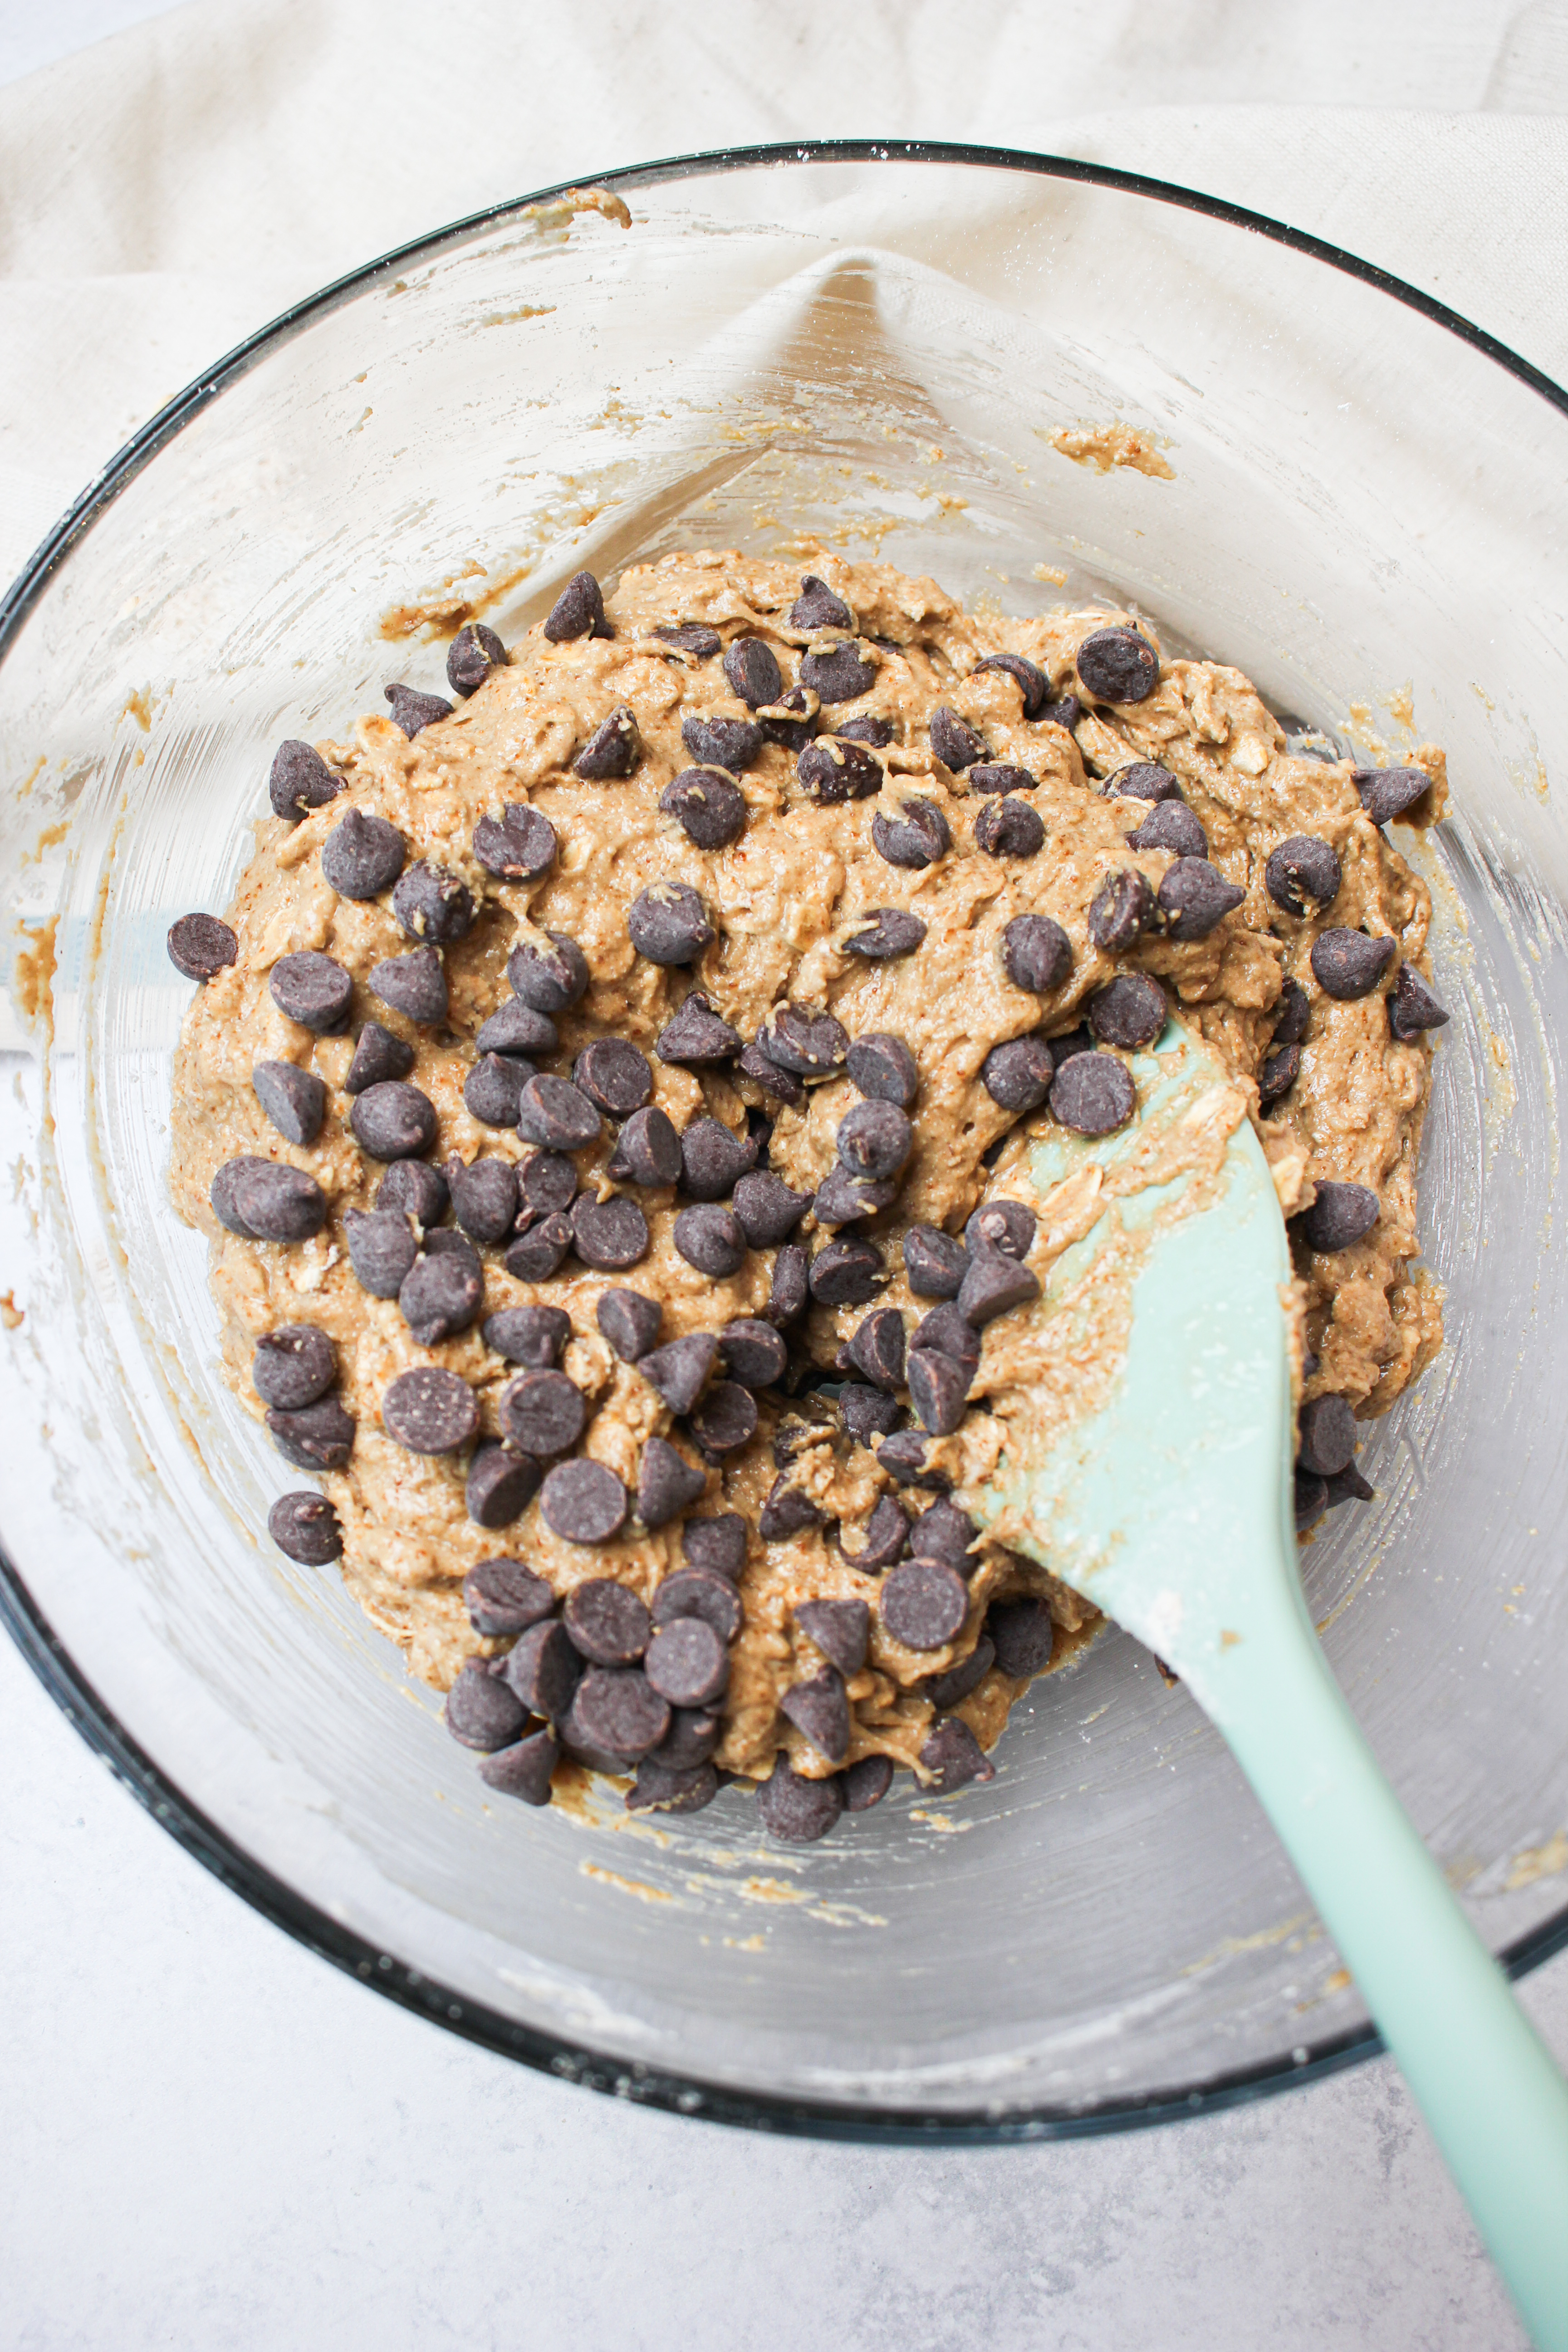 Folding in the chocolate chips into the batter.